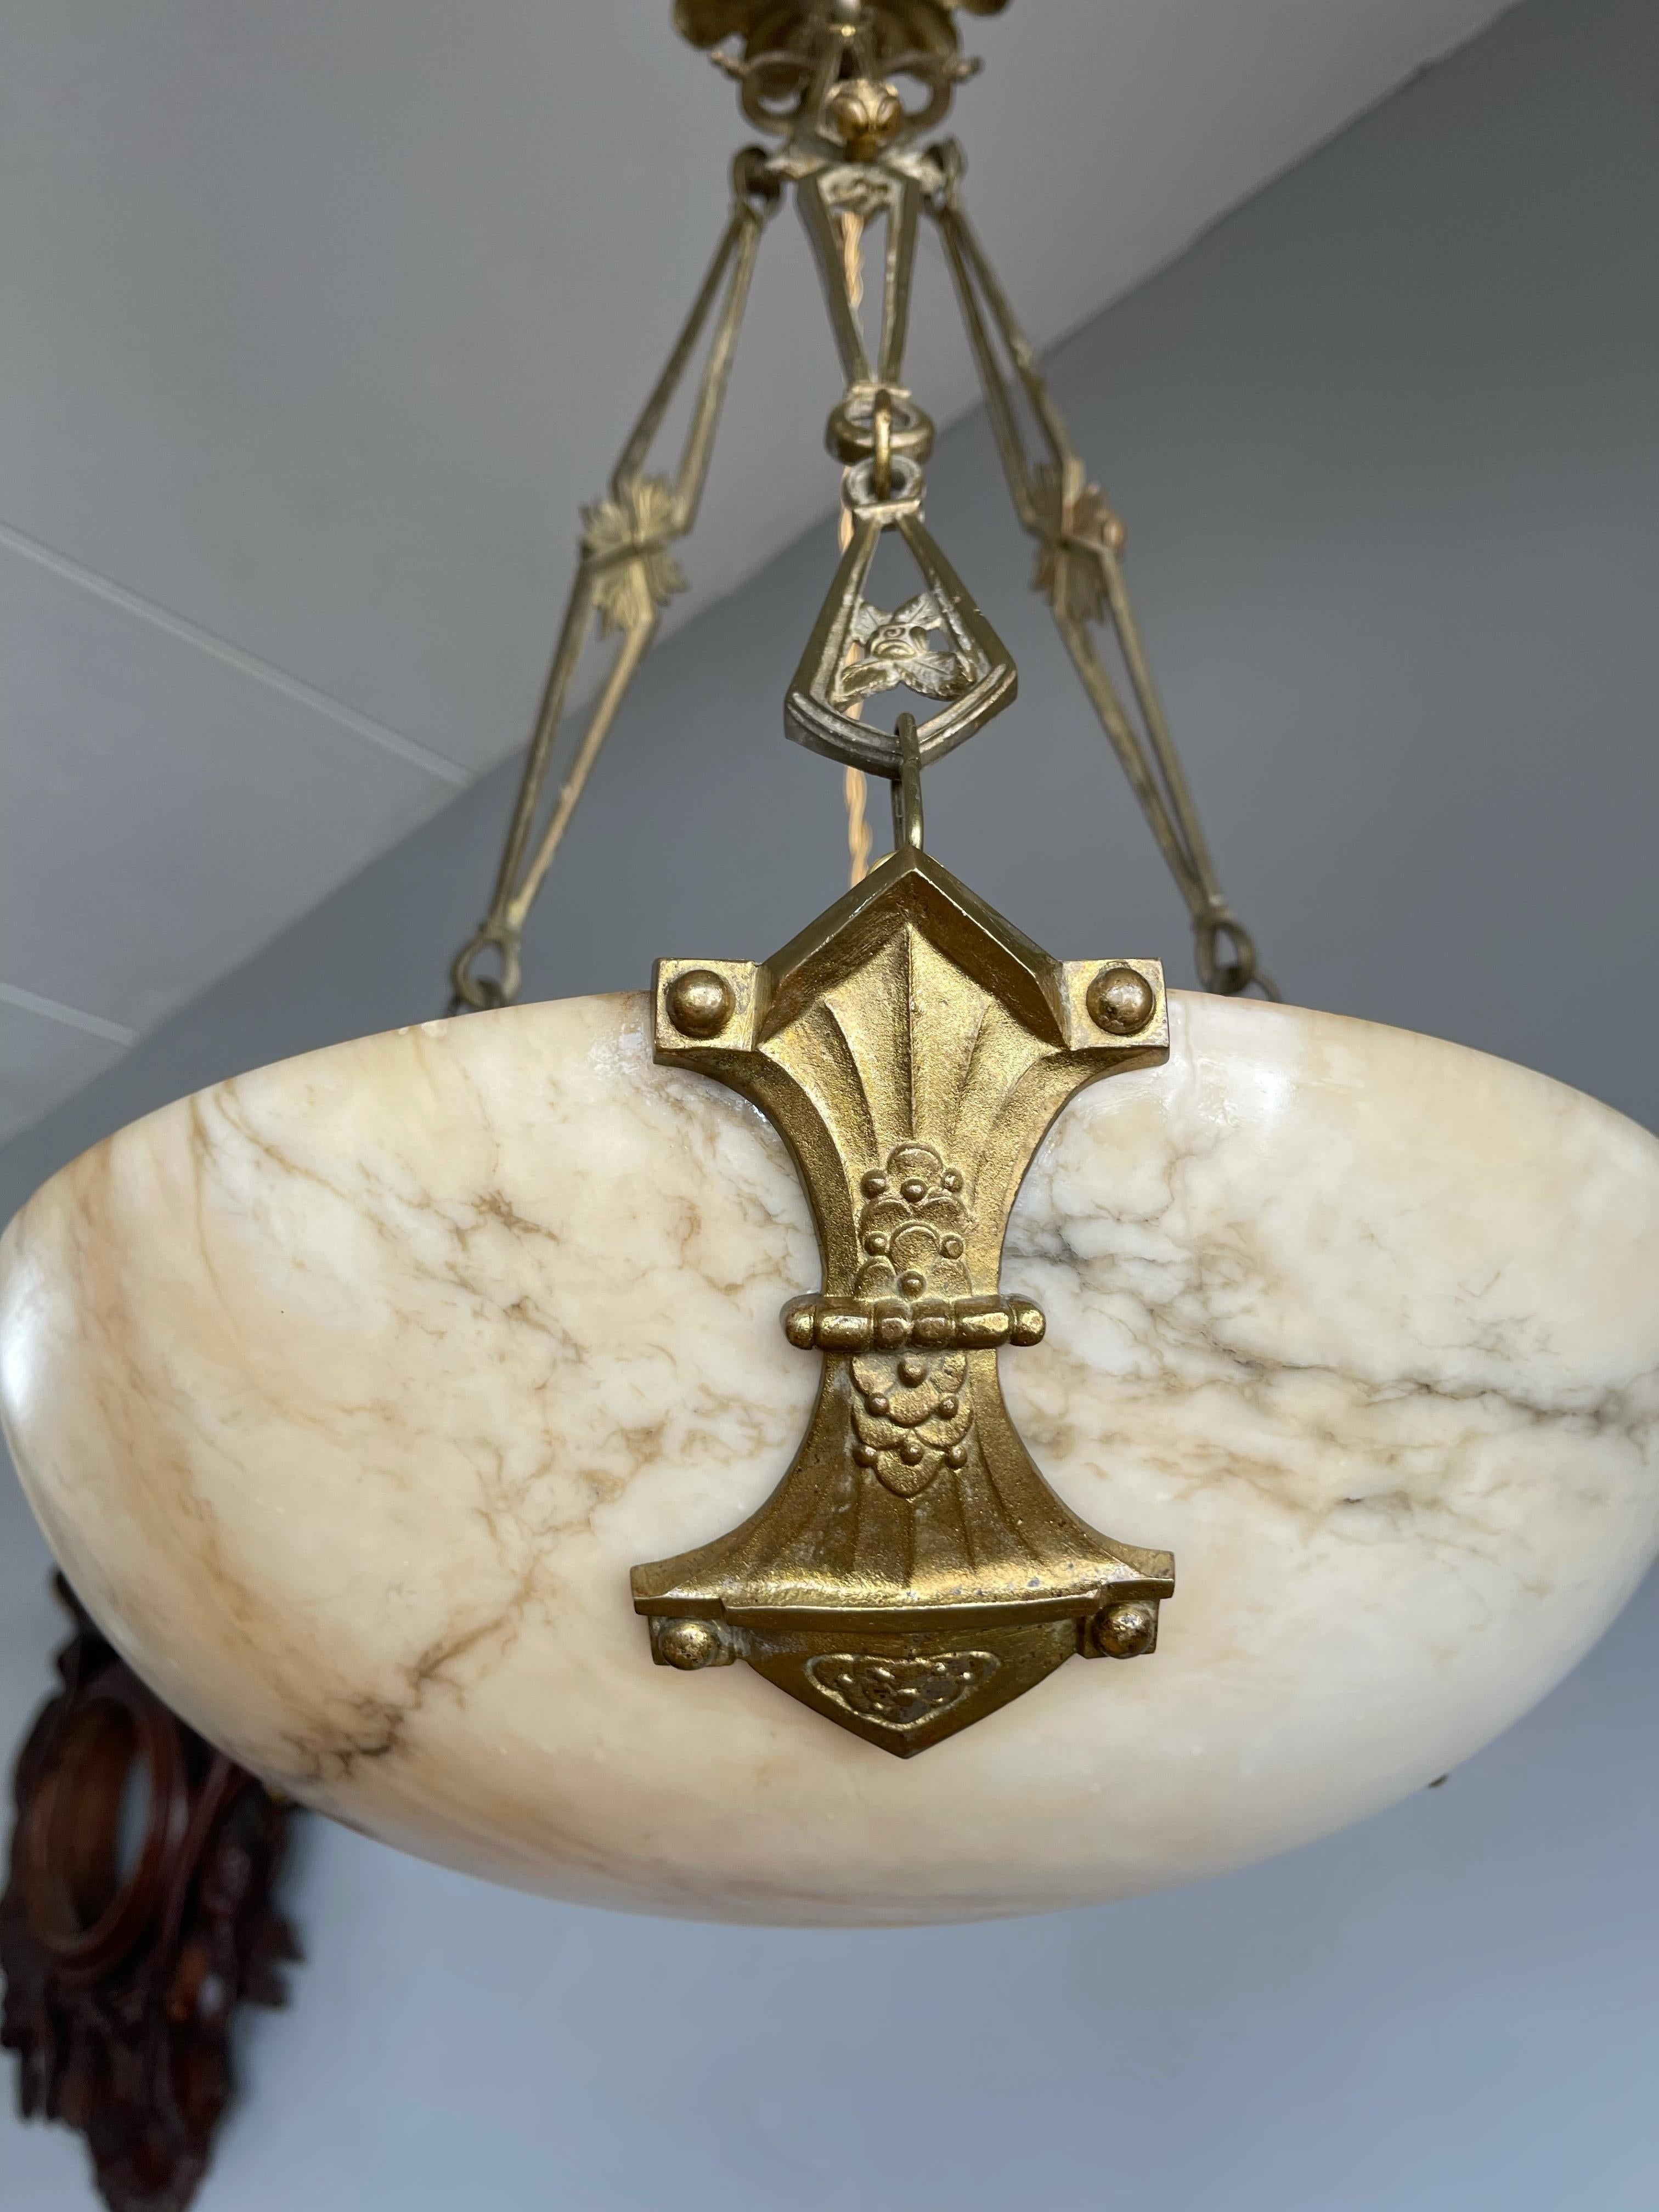 Another beautifully designed, all handcrafted and excellent condition, antique mineral stone fixture.

If you are looking for a good condition and good size Art Deco light fixture then this fine specimen with its unique pattern of veins could be